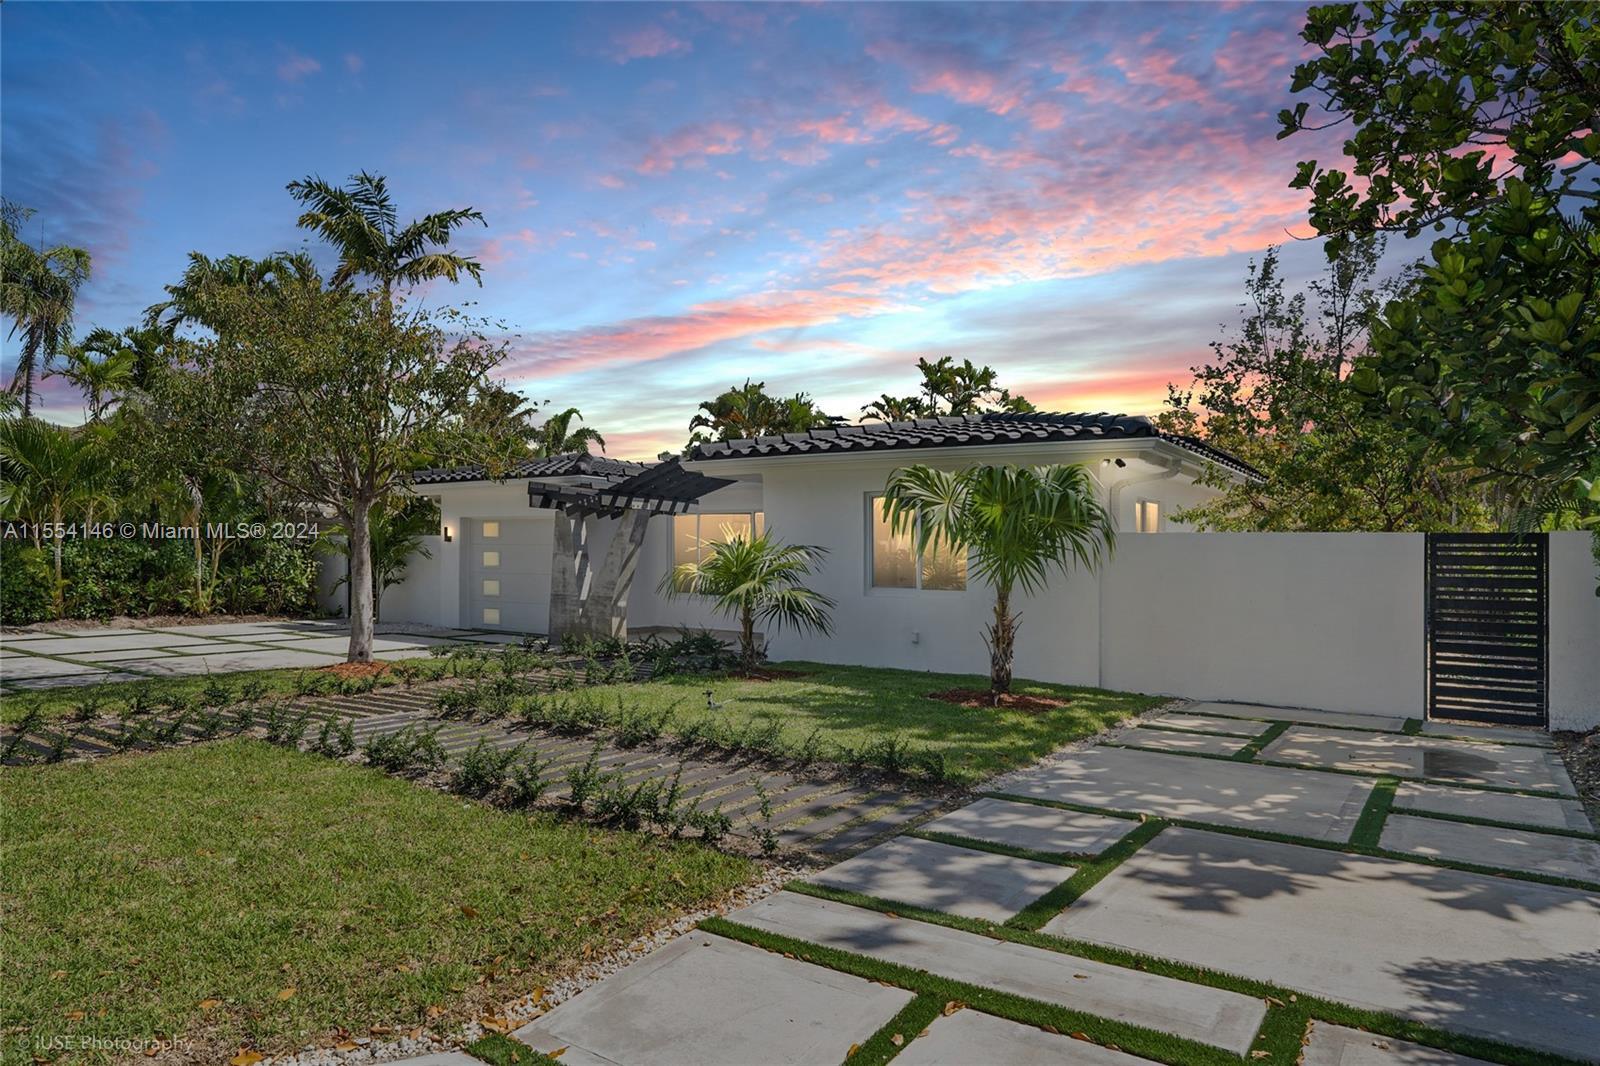 Photo of 1406 NE 18th Ave in Fort Lauderdale, FL